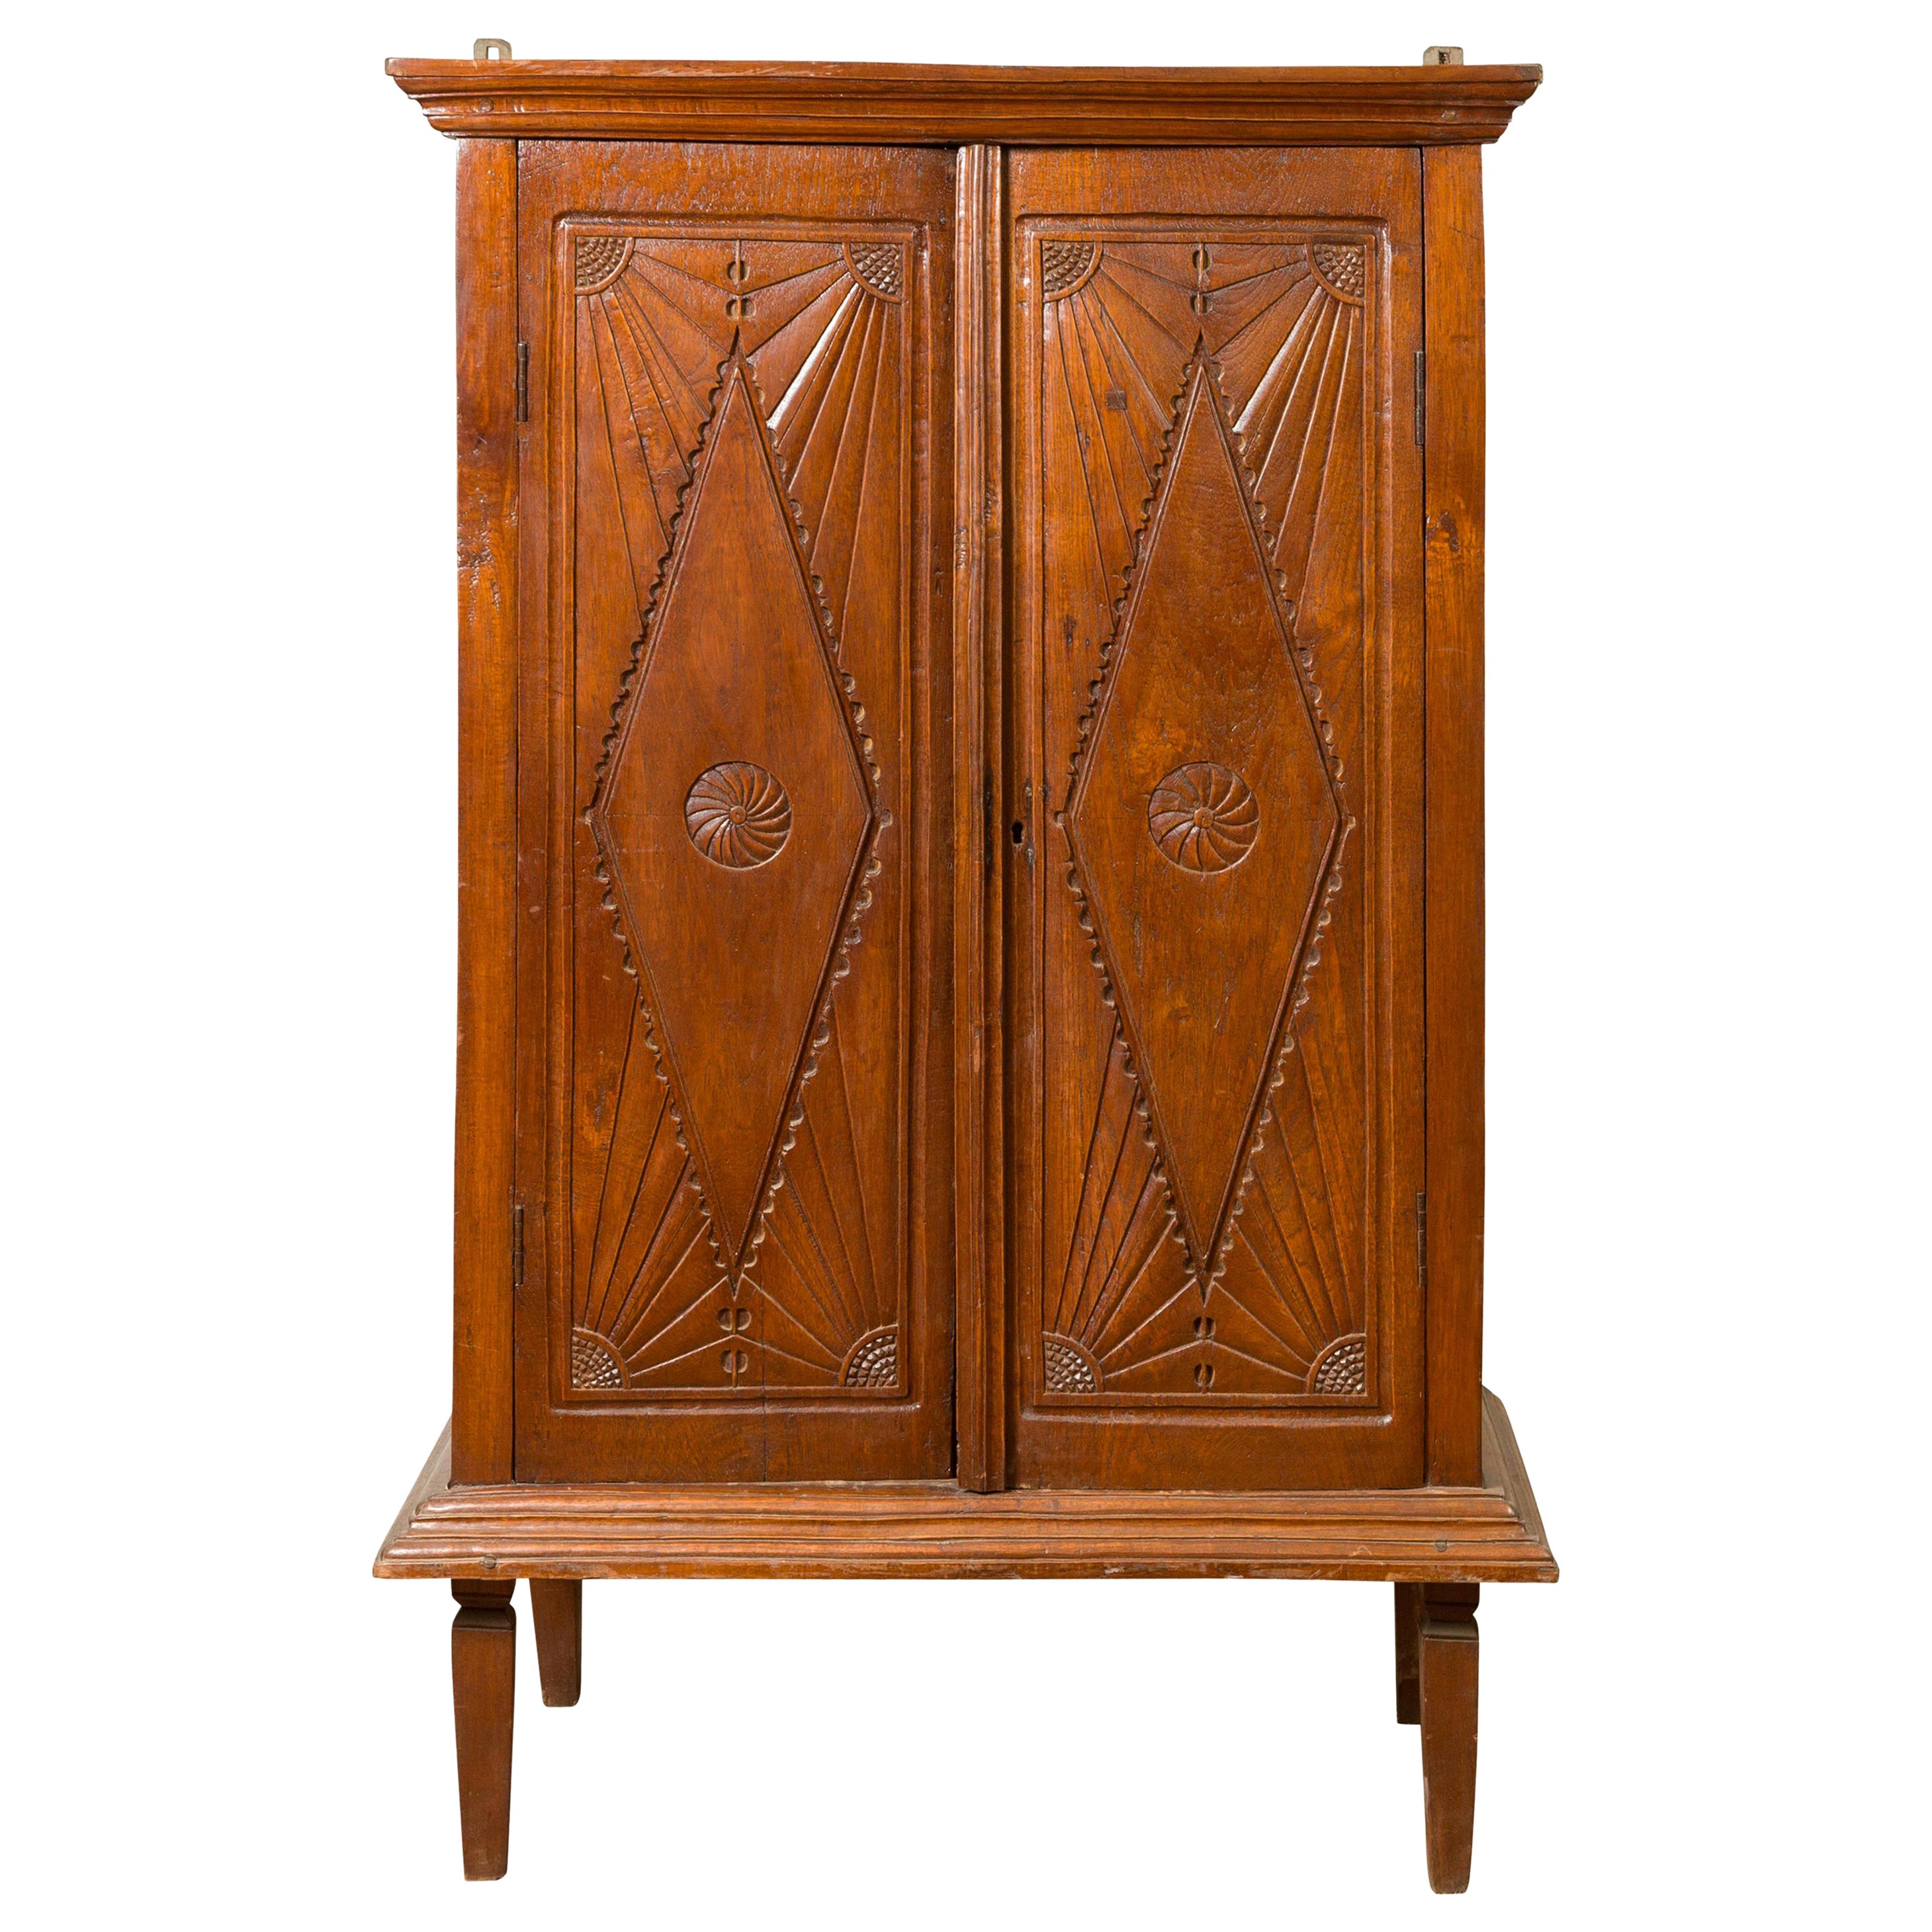 Dutch Colonial Carved Wooden Cabinet with Diamonds and Radiating Motifs